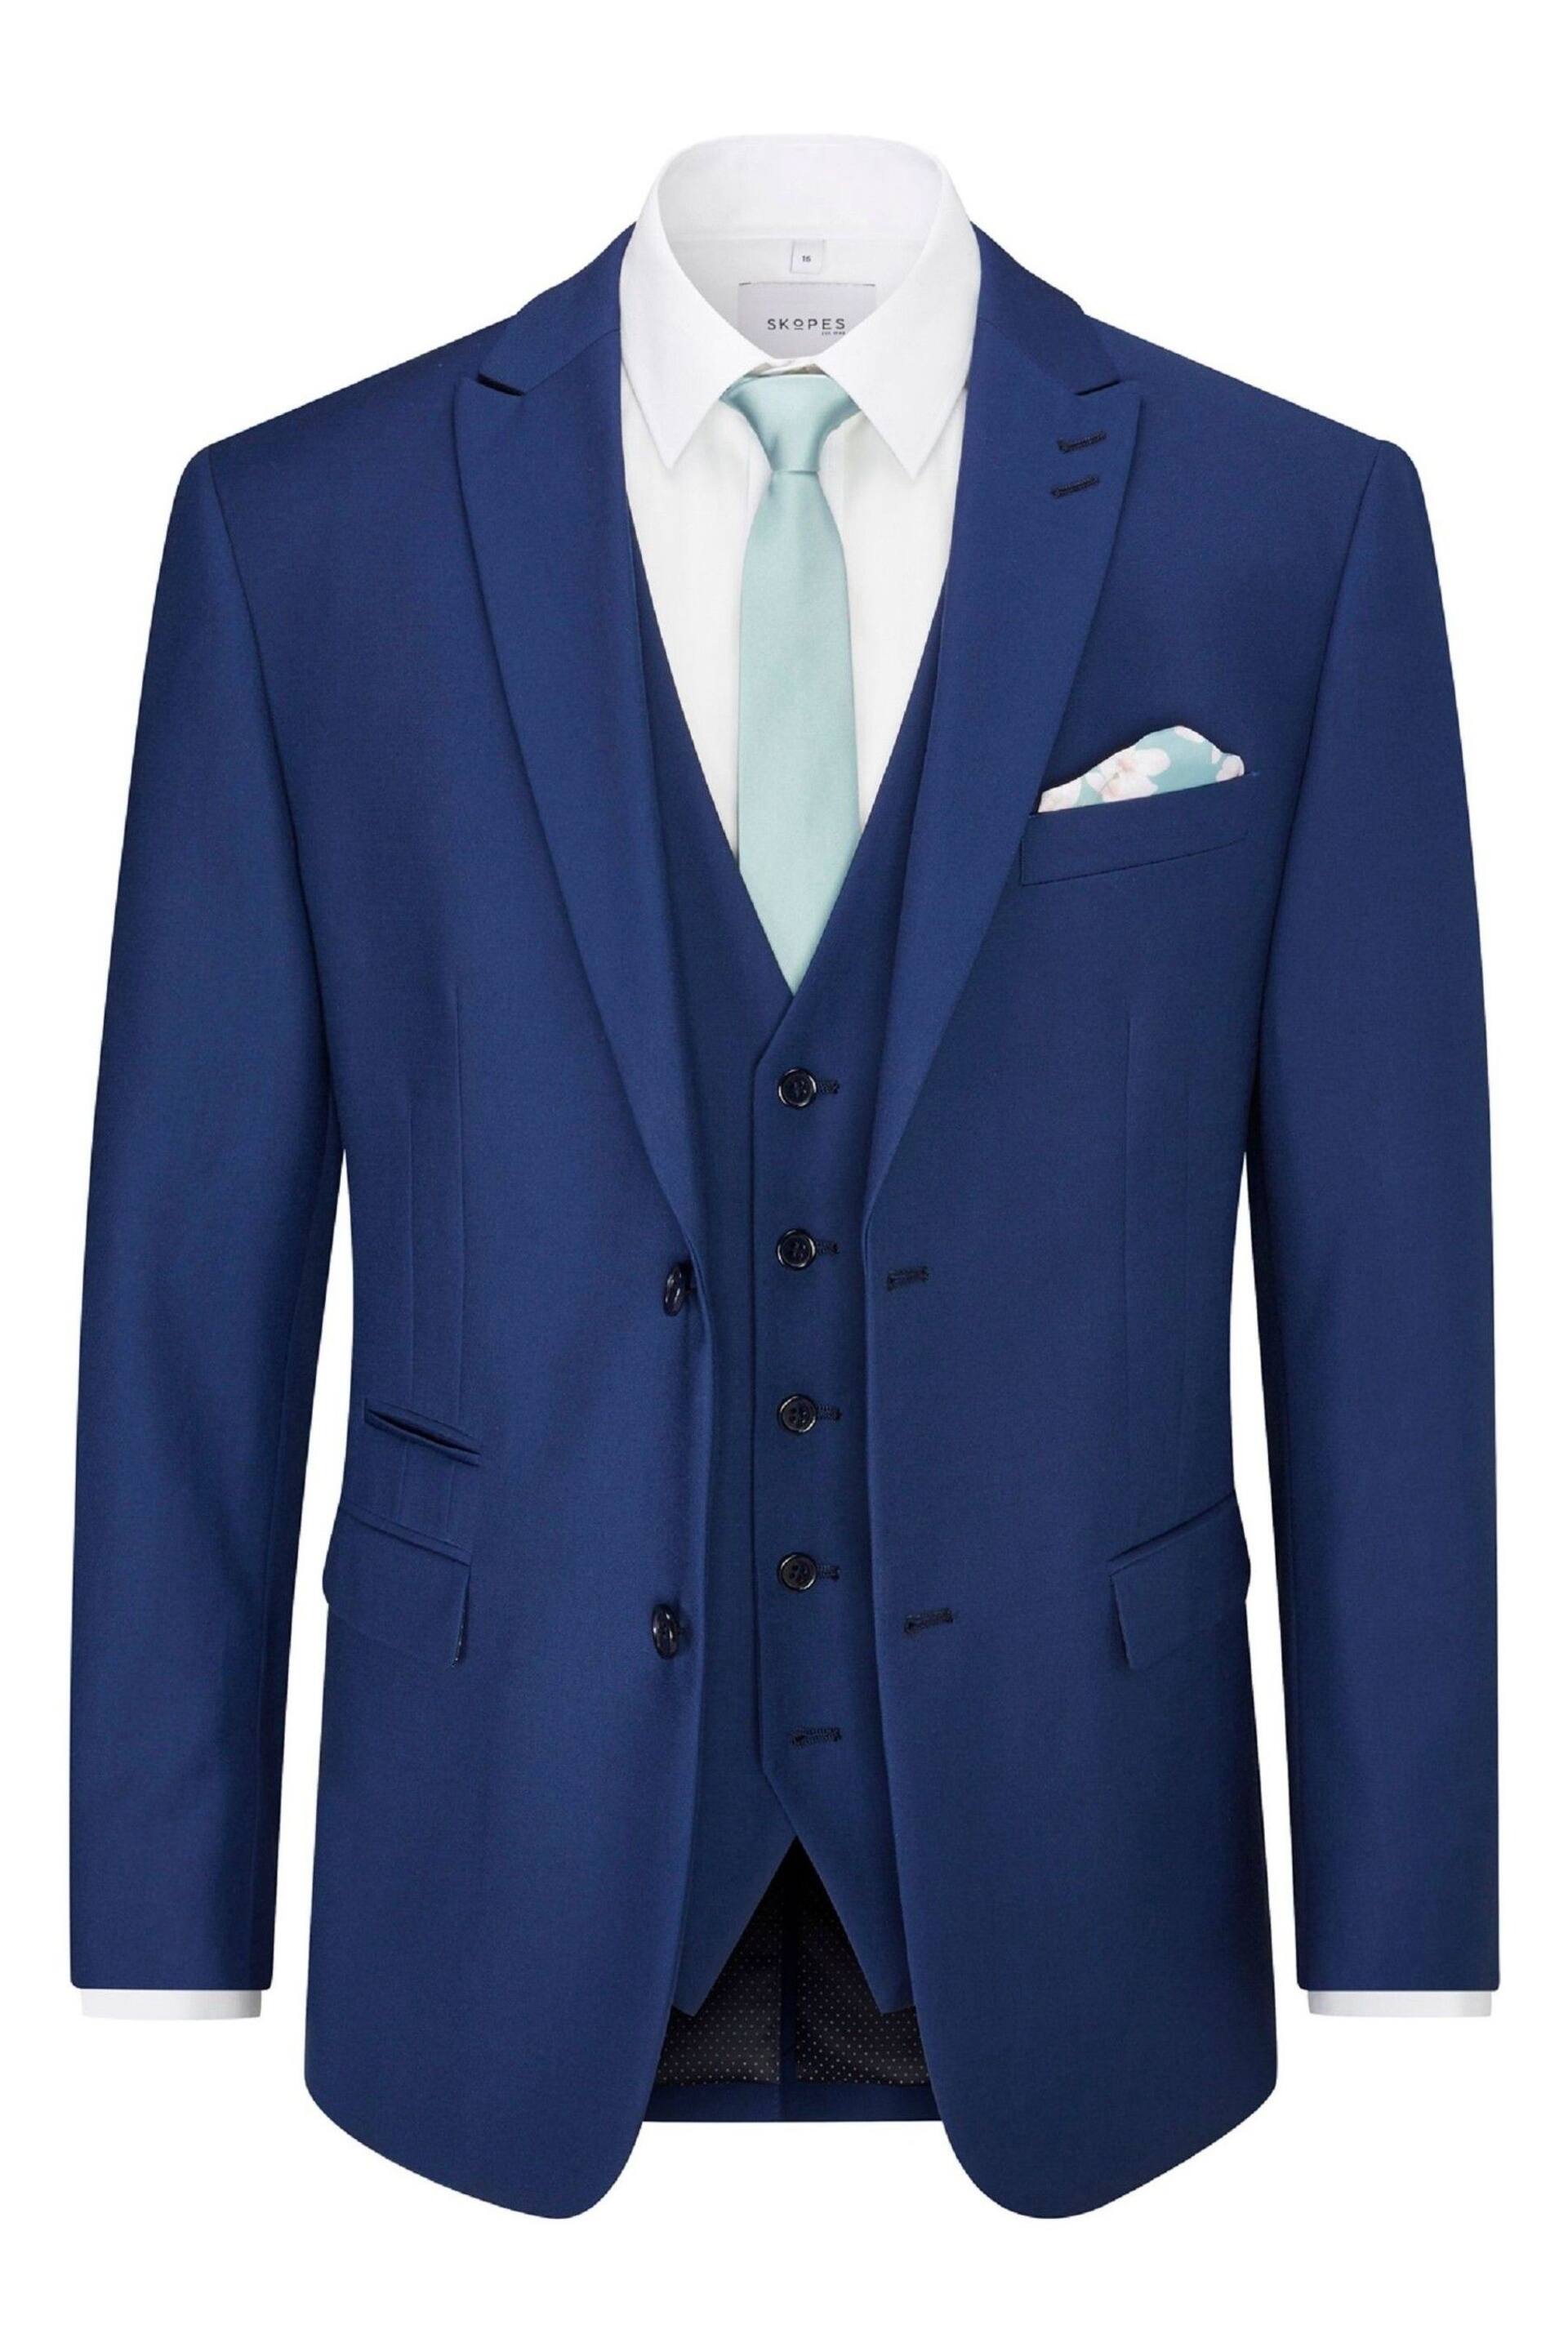 Skopes Kennedy Royal Blue Tailored Fit Suit Jacket - Image 3 of 4